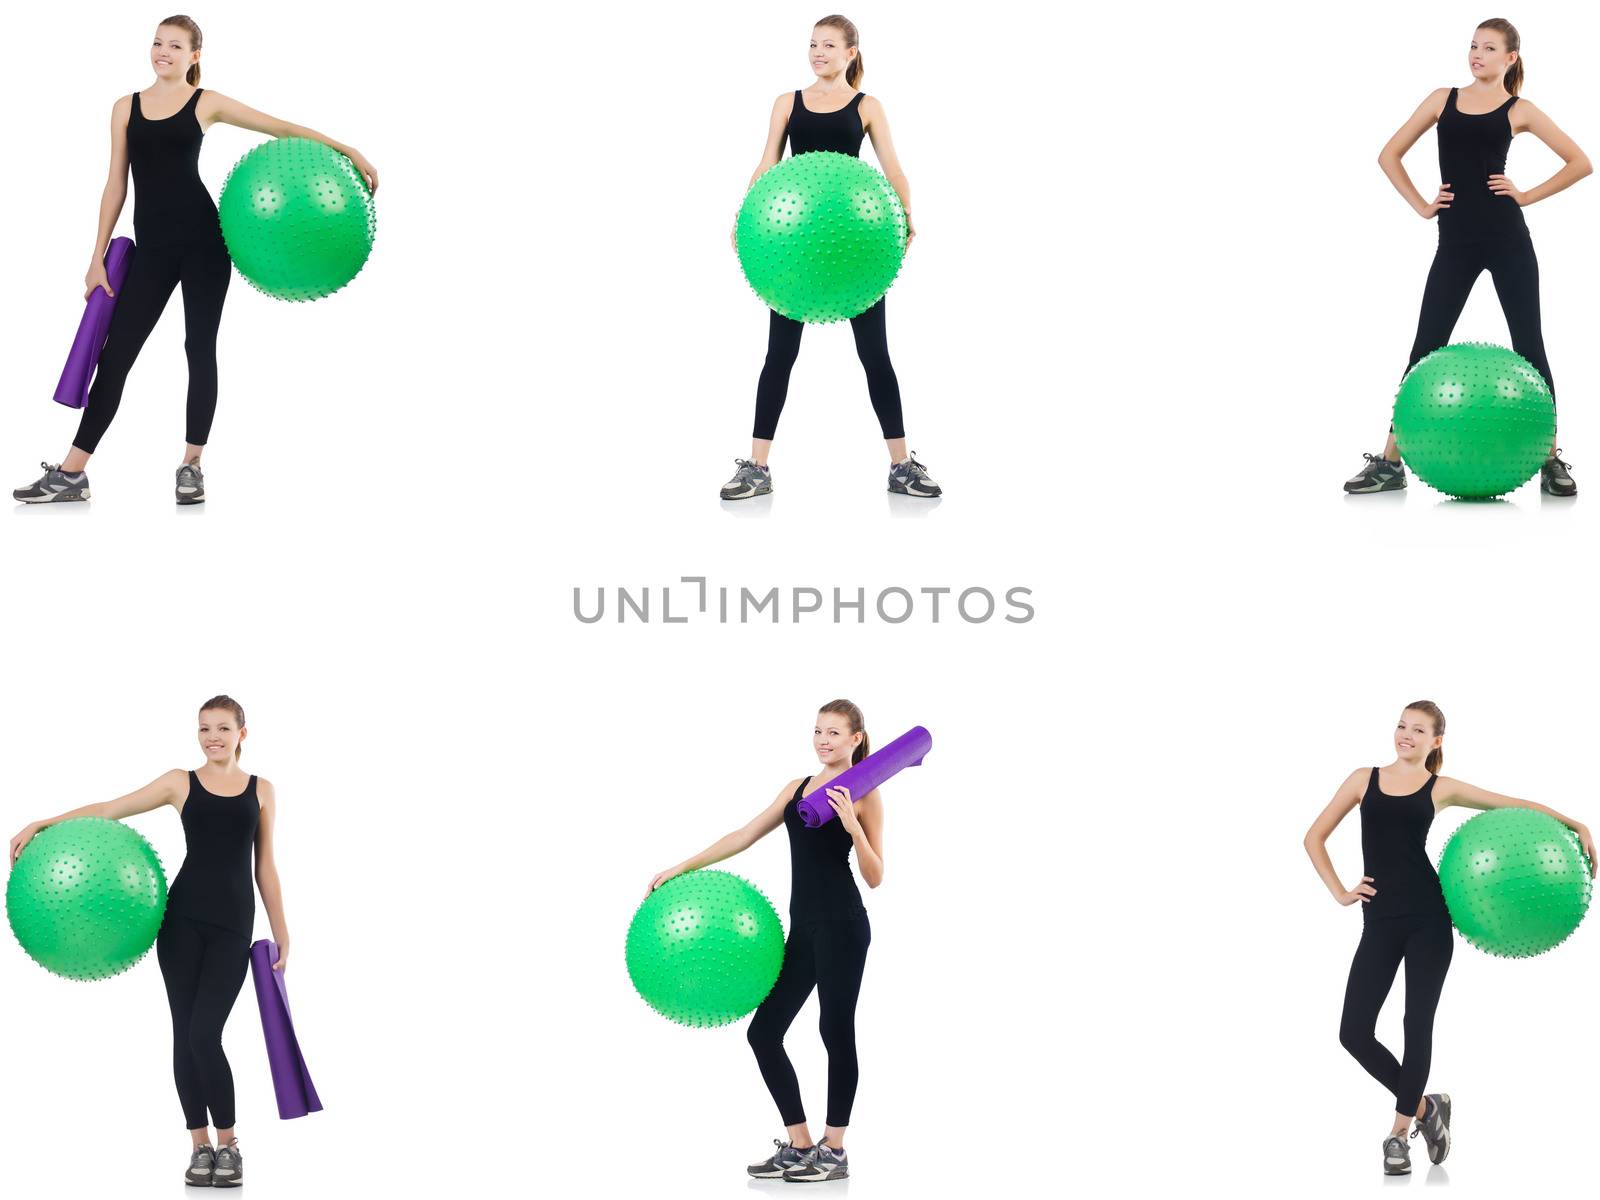 Young woman doing exercises with fitball  by Elnur